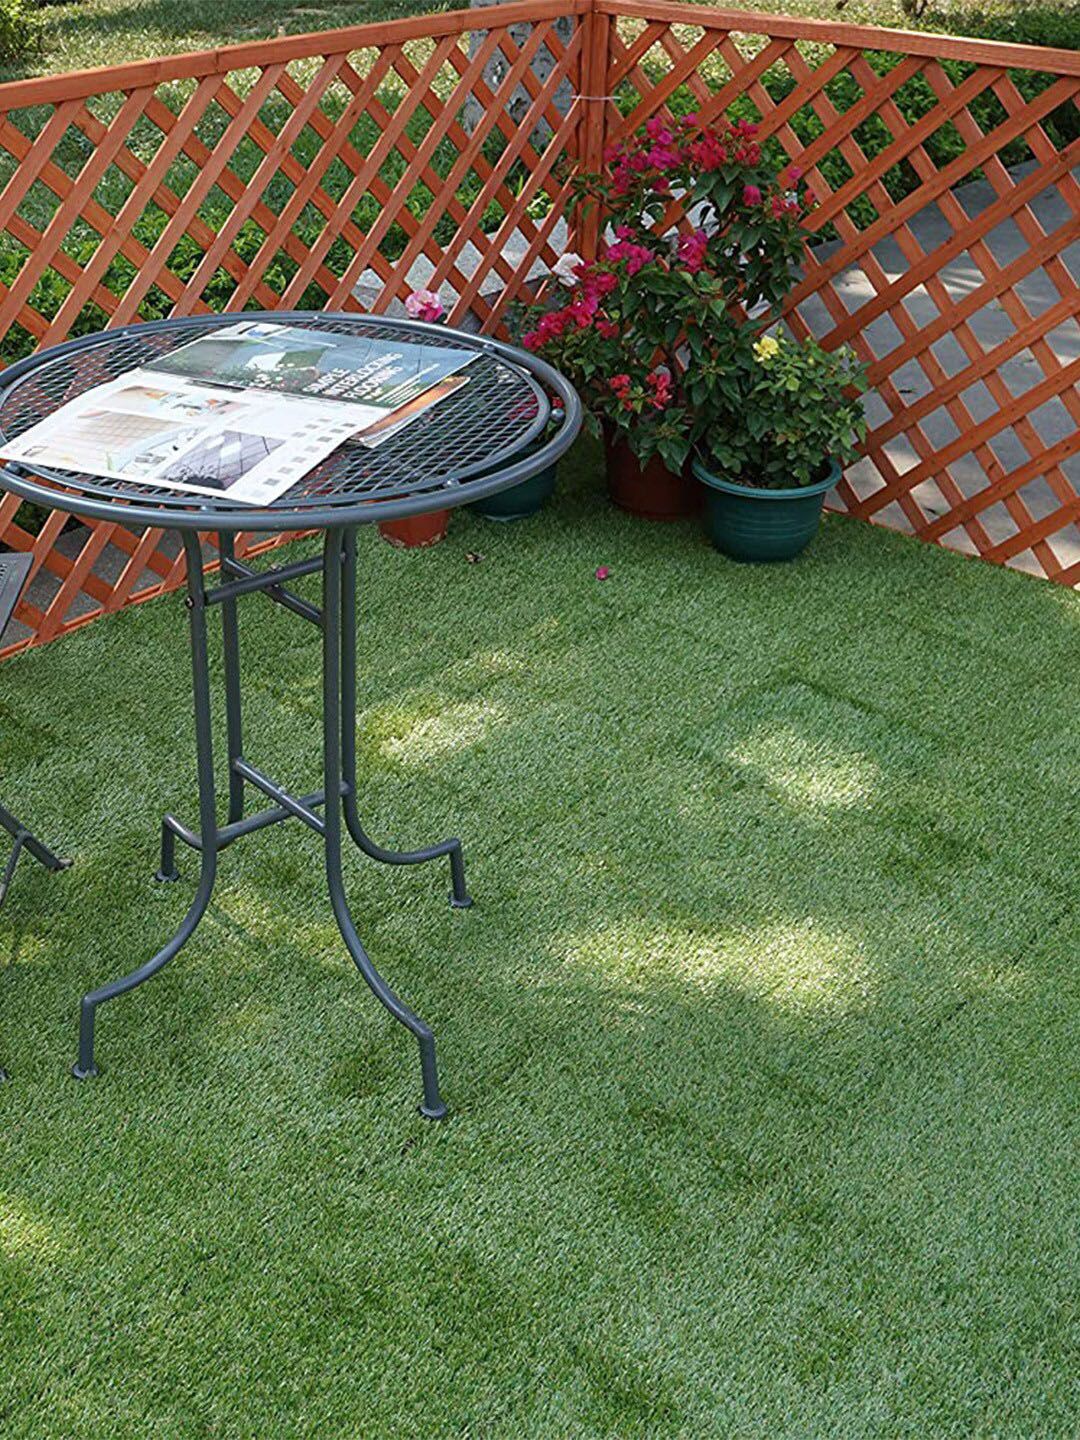 Sharpex Green Solid Grass Deck Tiles Price in India